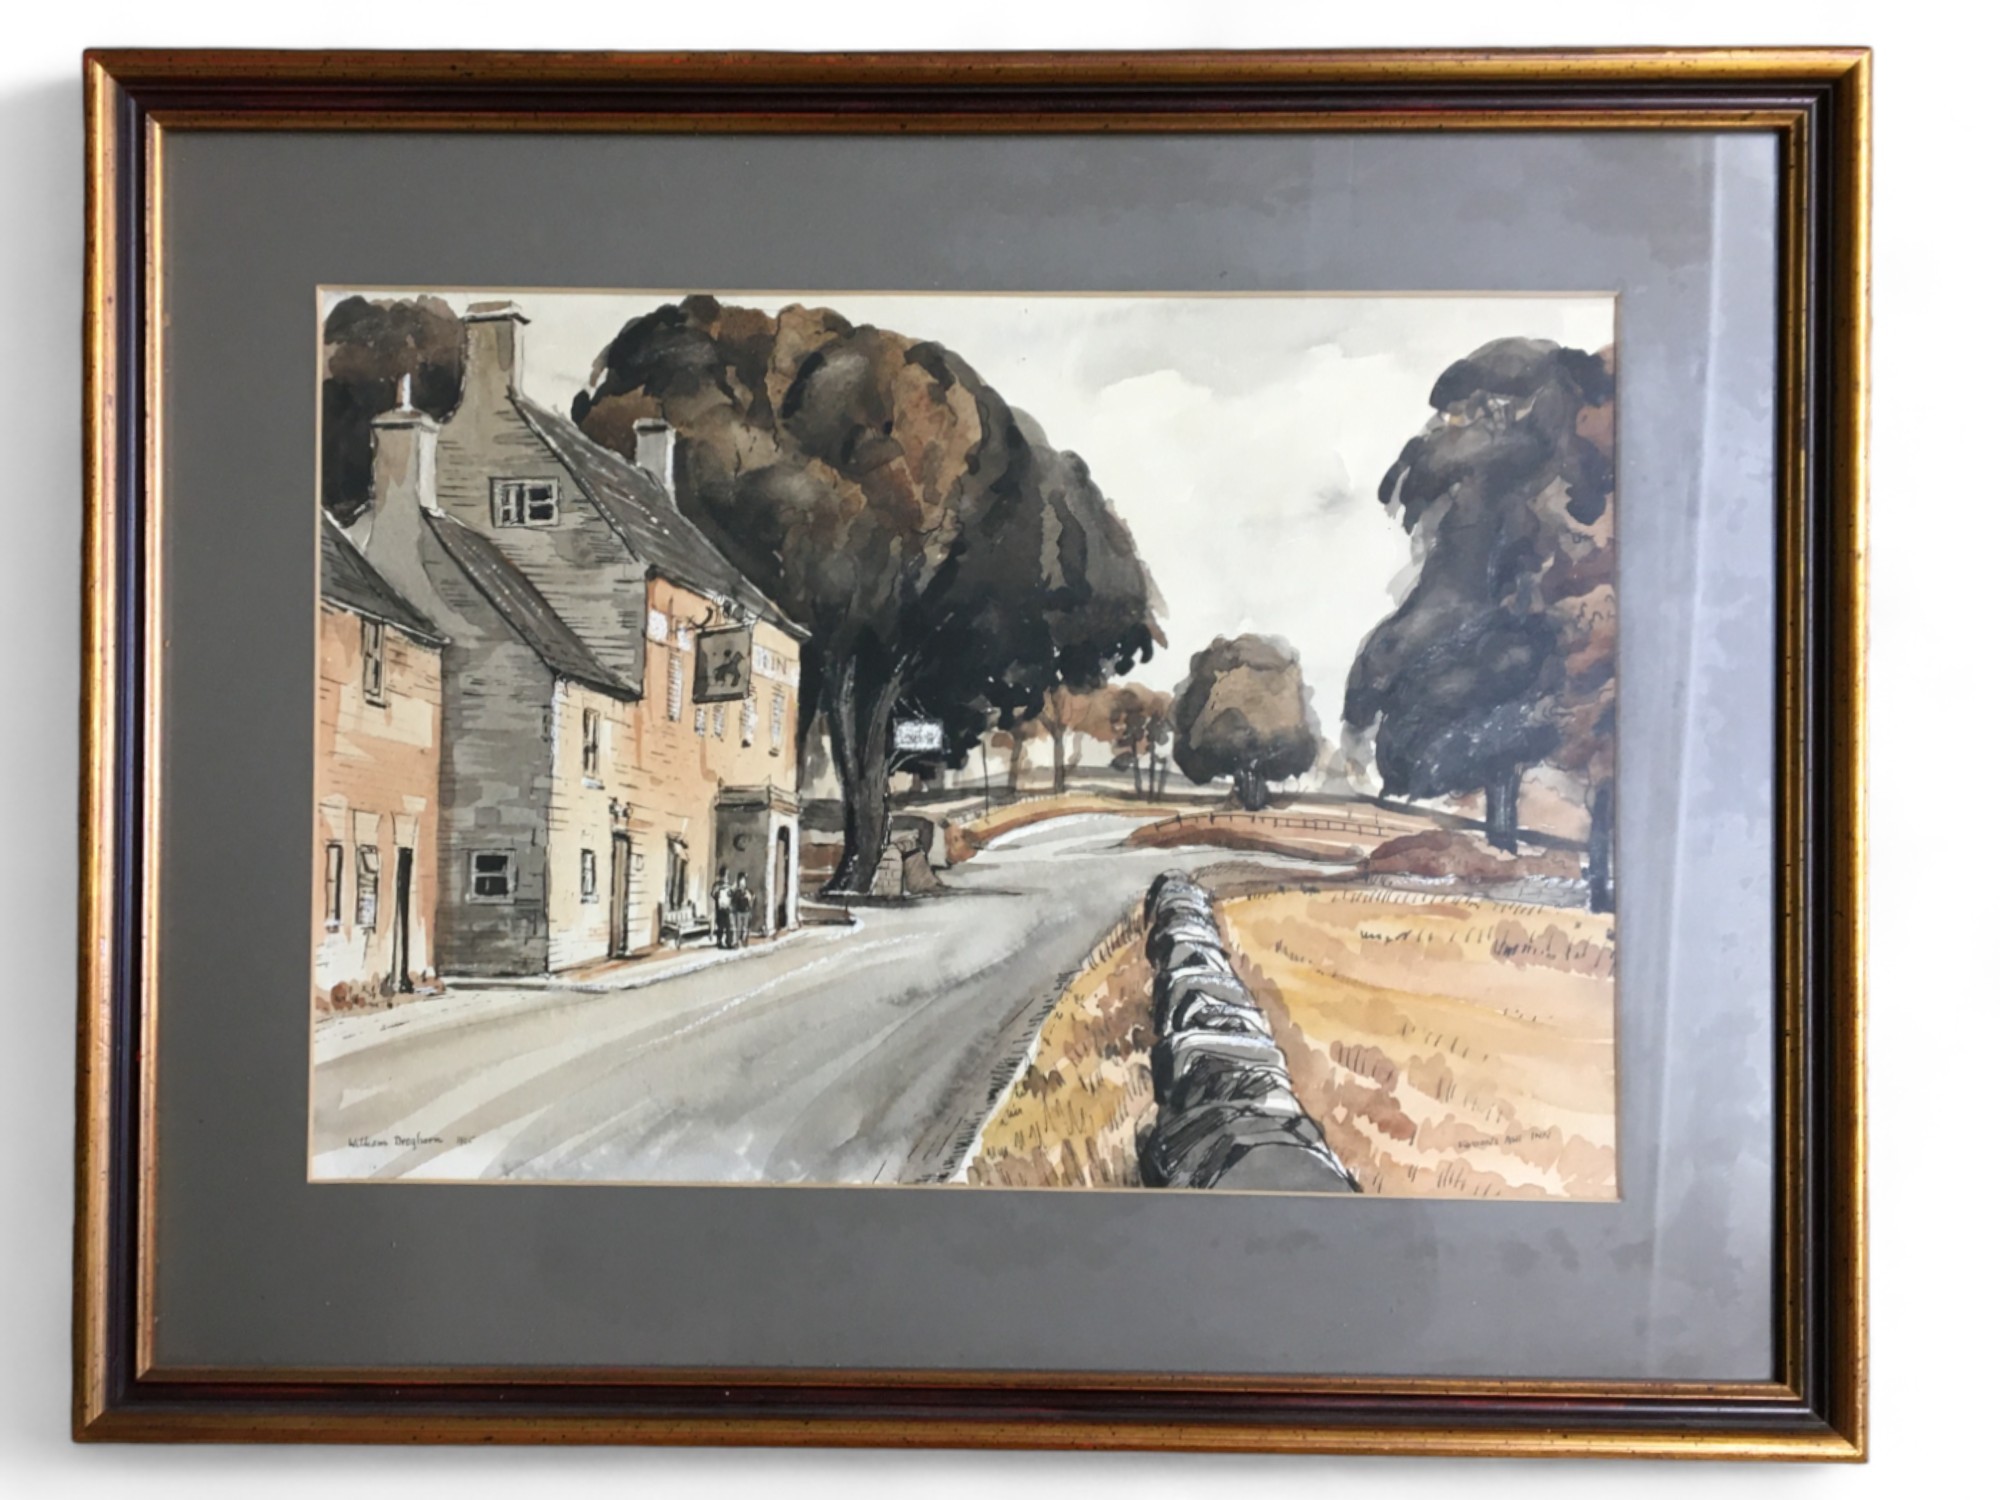 William Dreghorn (1908-2001) - Ink and Wash artwork "Foston's Ash Inn" Signed and dated lower right 